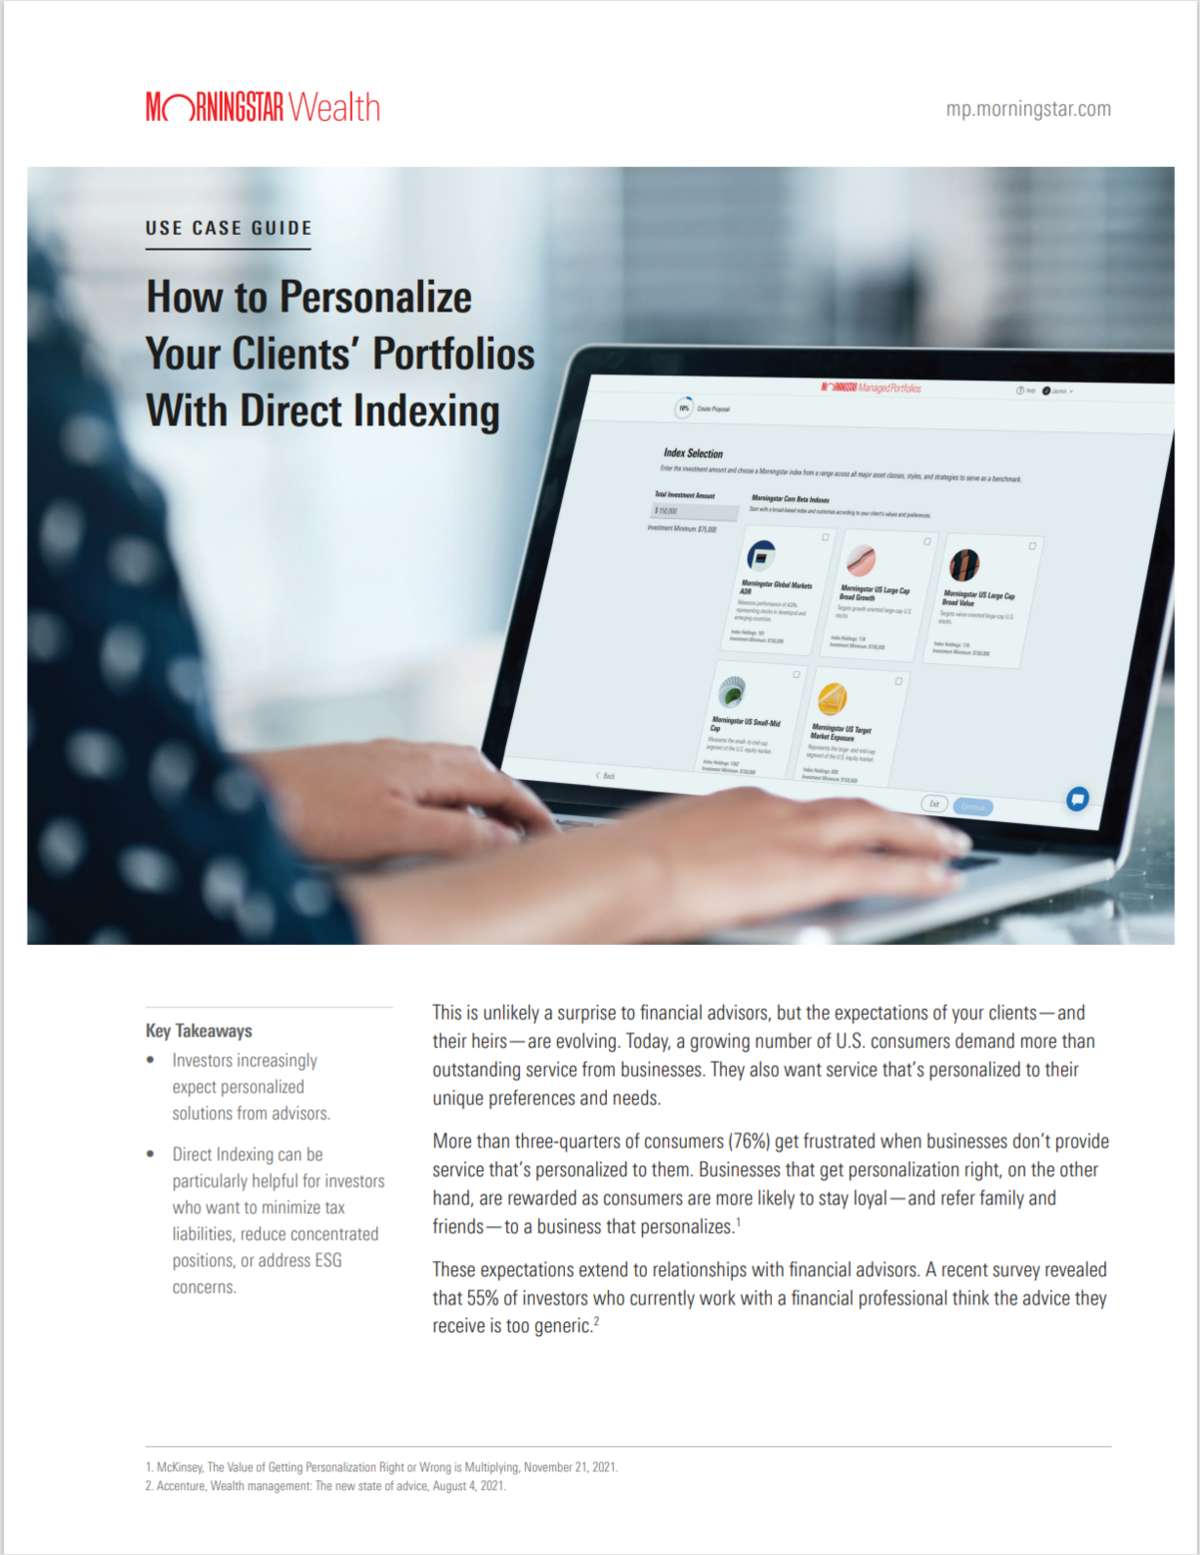 Use Case Guide: How to Personalize Your Clients' Portfolios With Direct Indexing